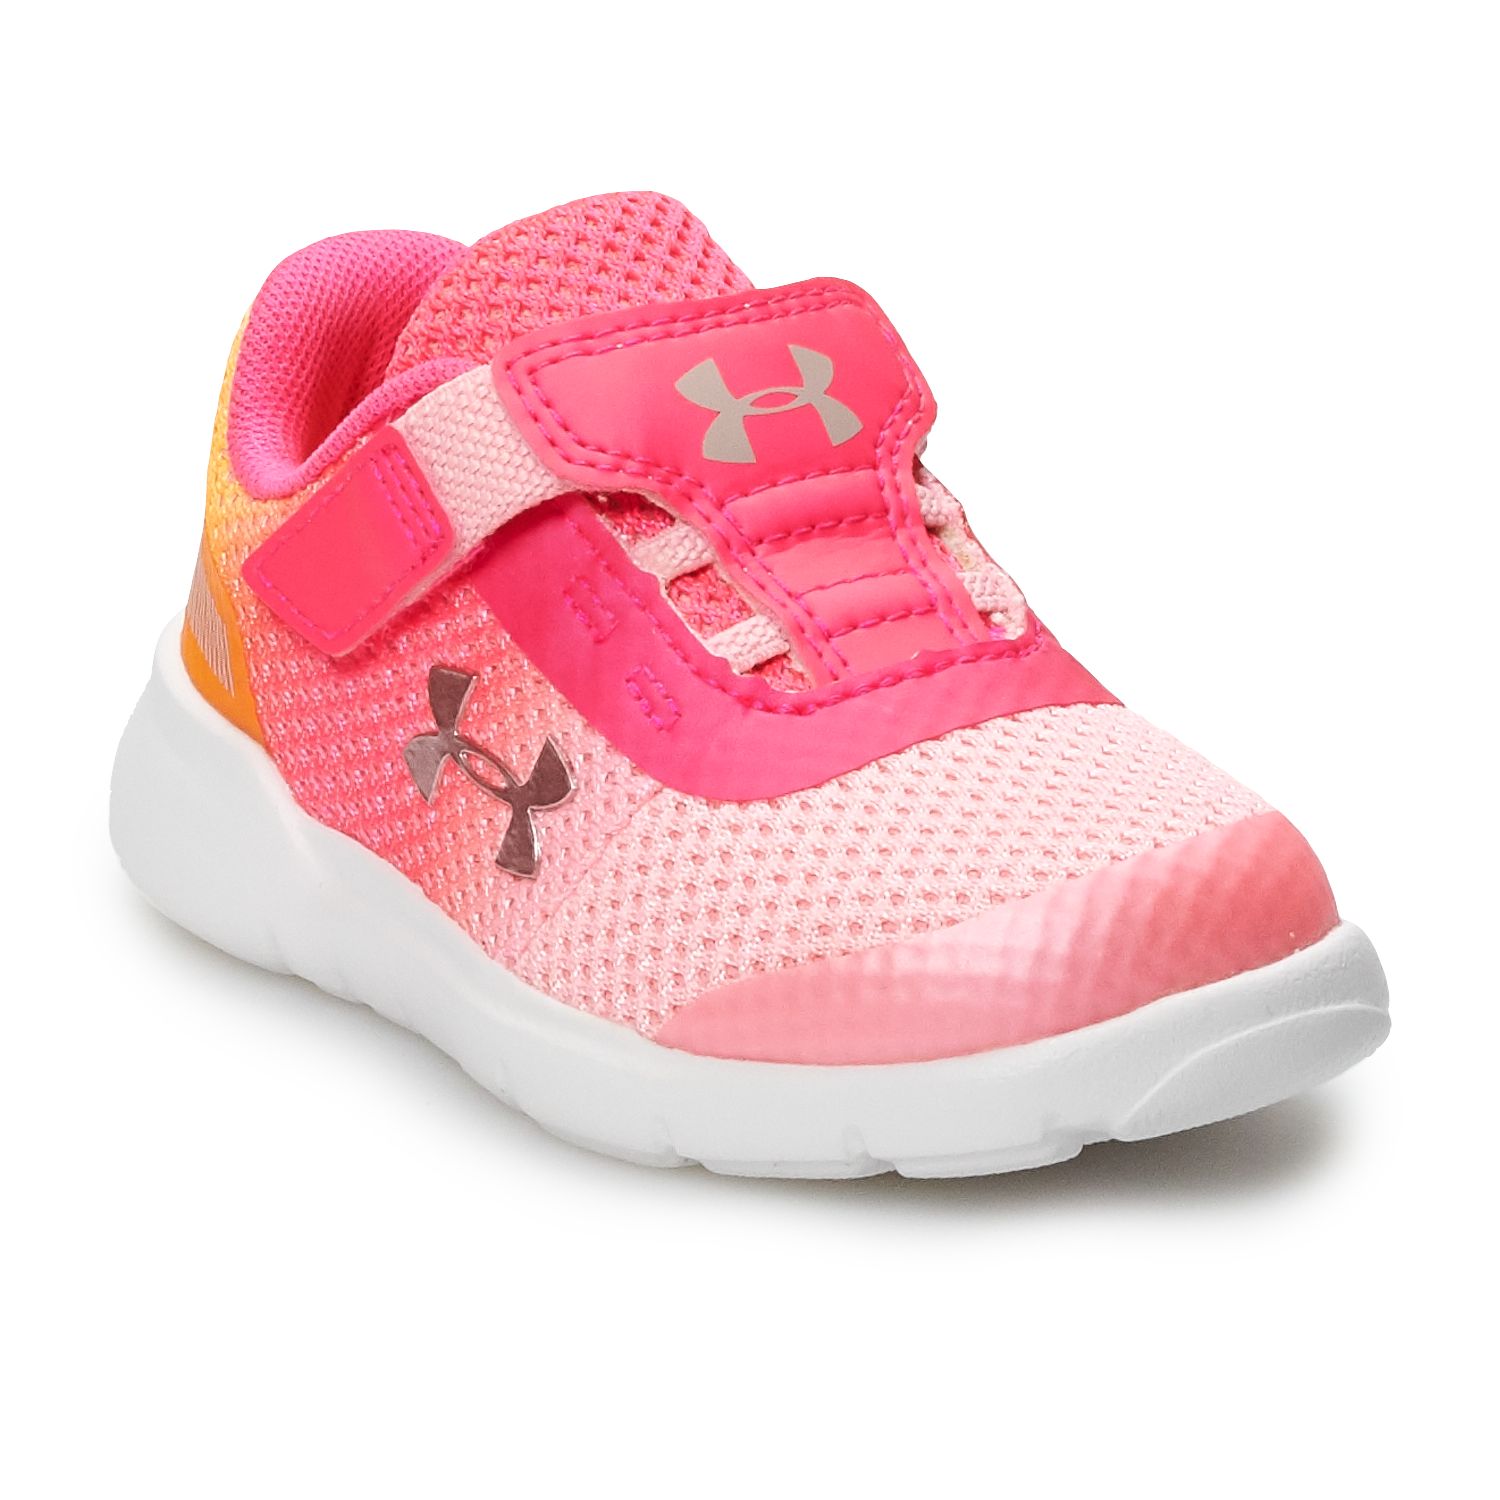 Under Armour Girls GGS Infinity MB Gym Fitness Trainers Sneakers Shoes BHFO 6313